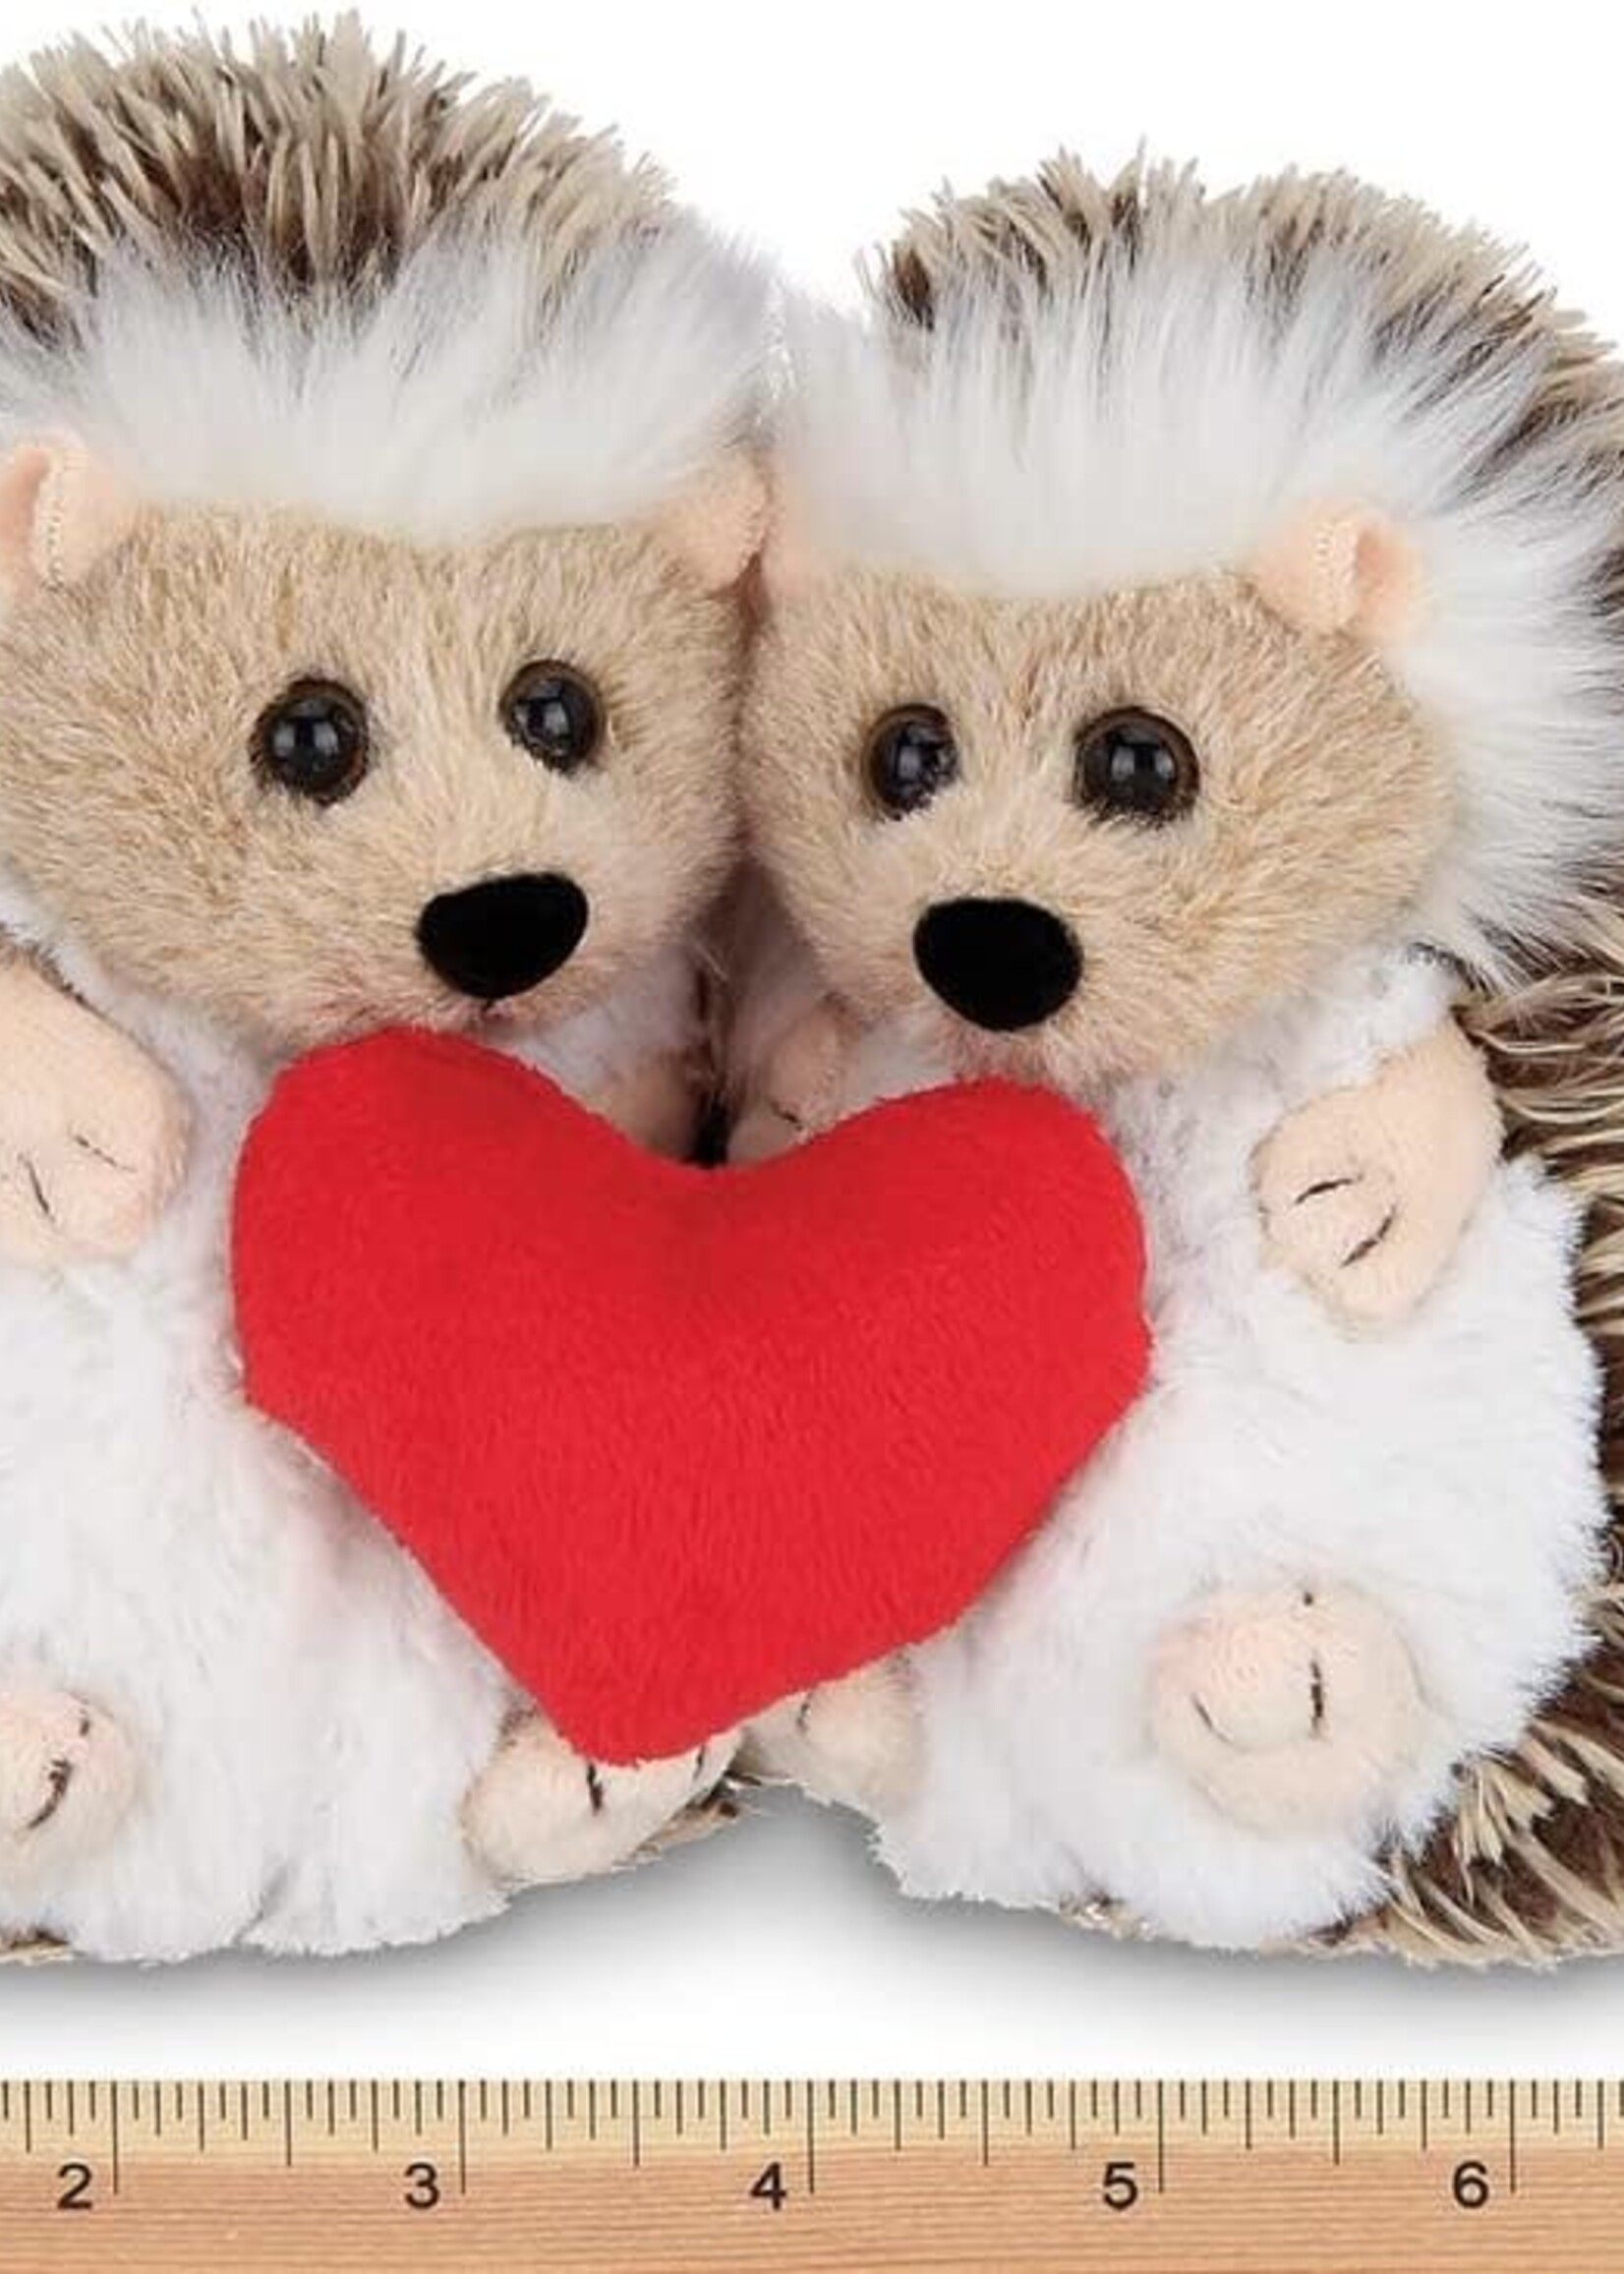 Lovie and Dovey Plush Stuffed Animal Hedgehogs Holding Heart, 5.5 inches